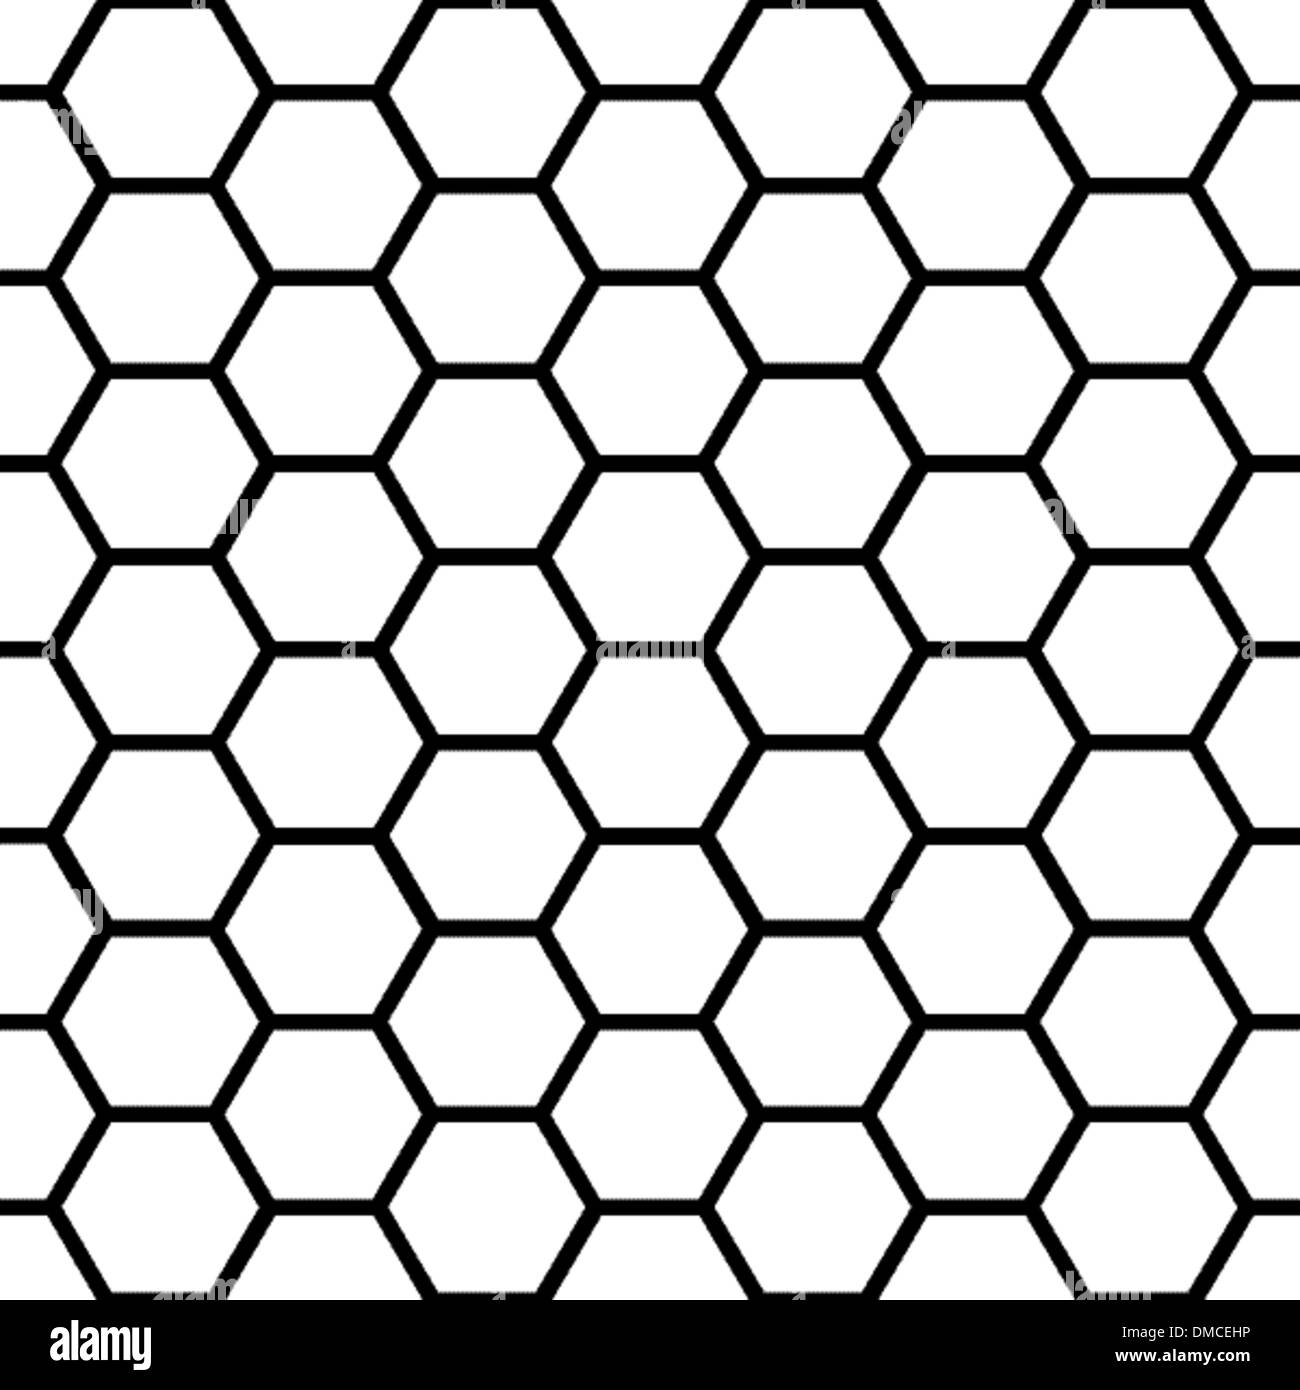 Abstract honey comb pattern design with grunge Vector Image